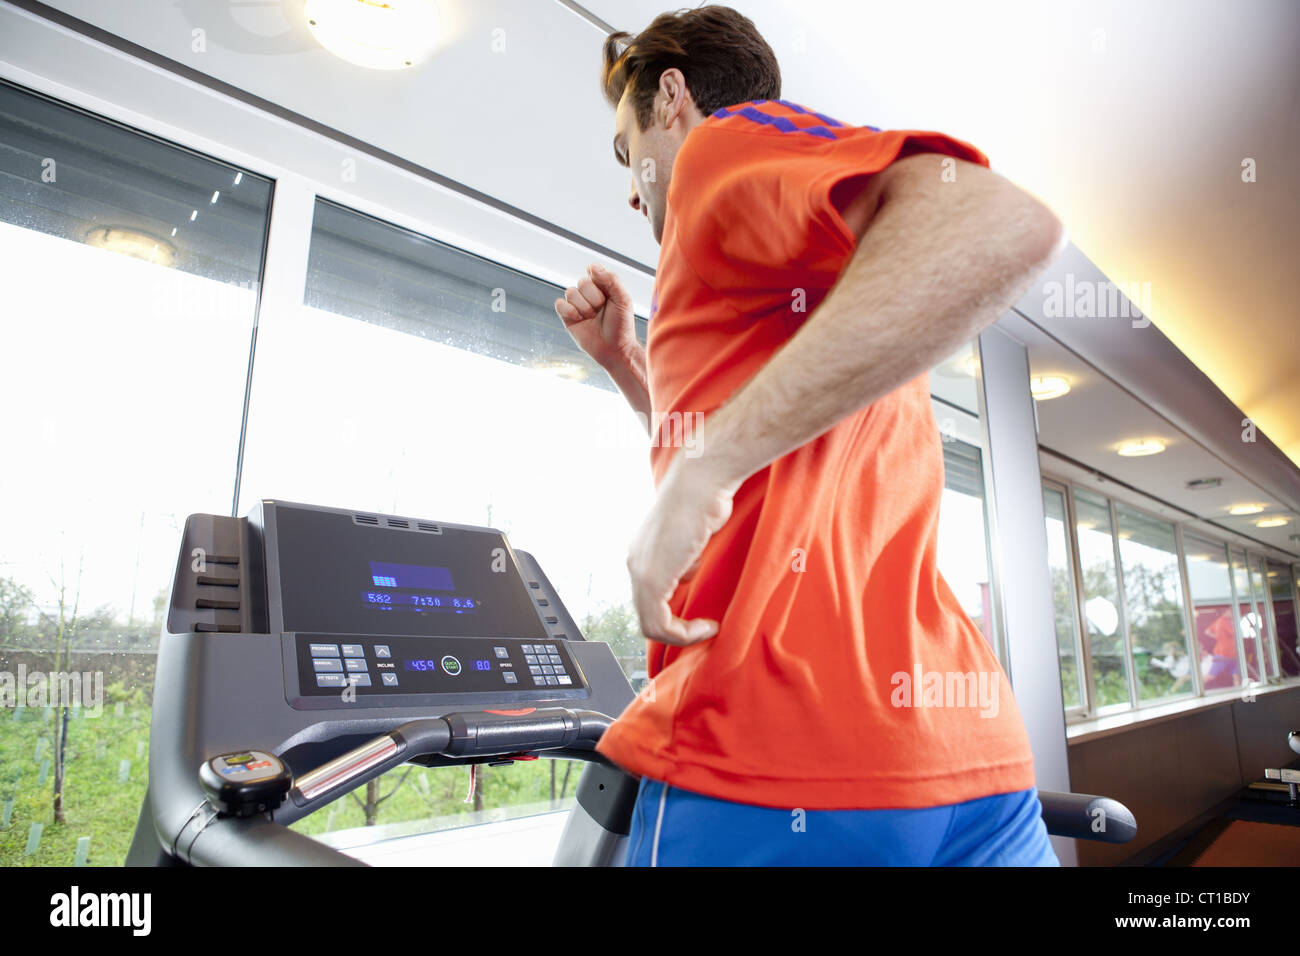 Man running on treadmill in gym Banque D'Images